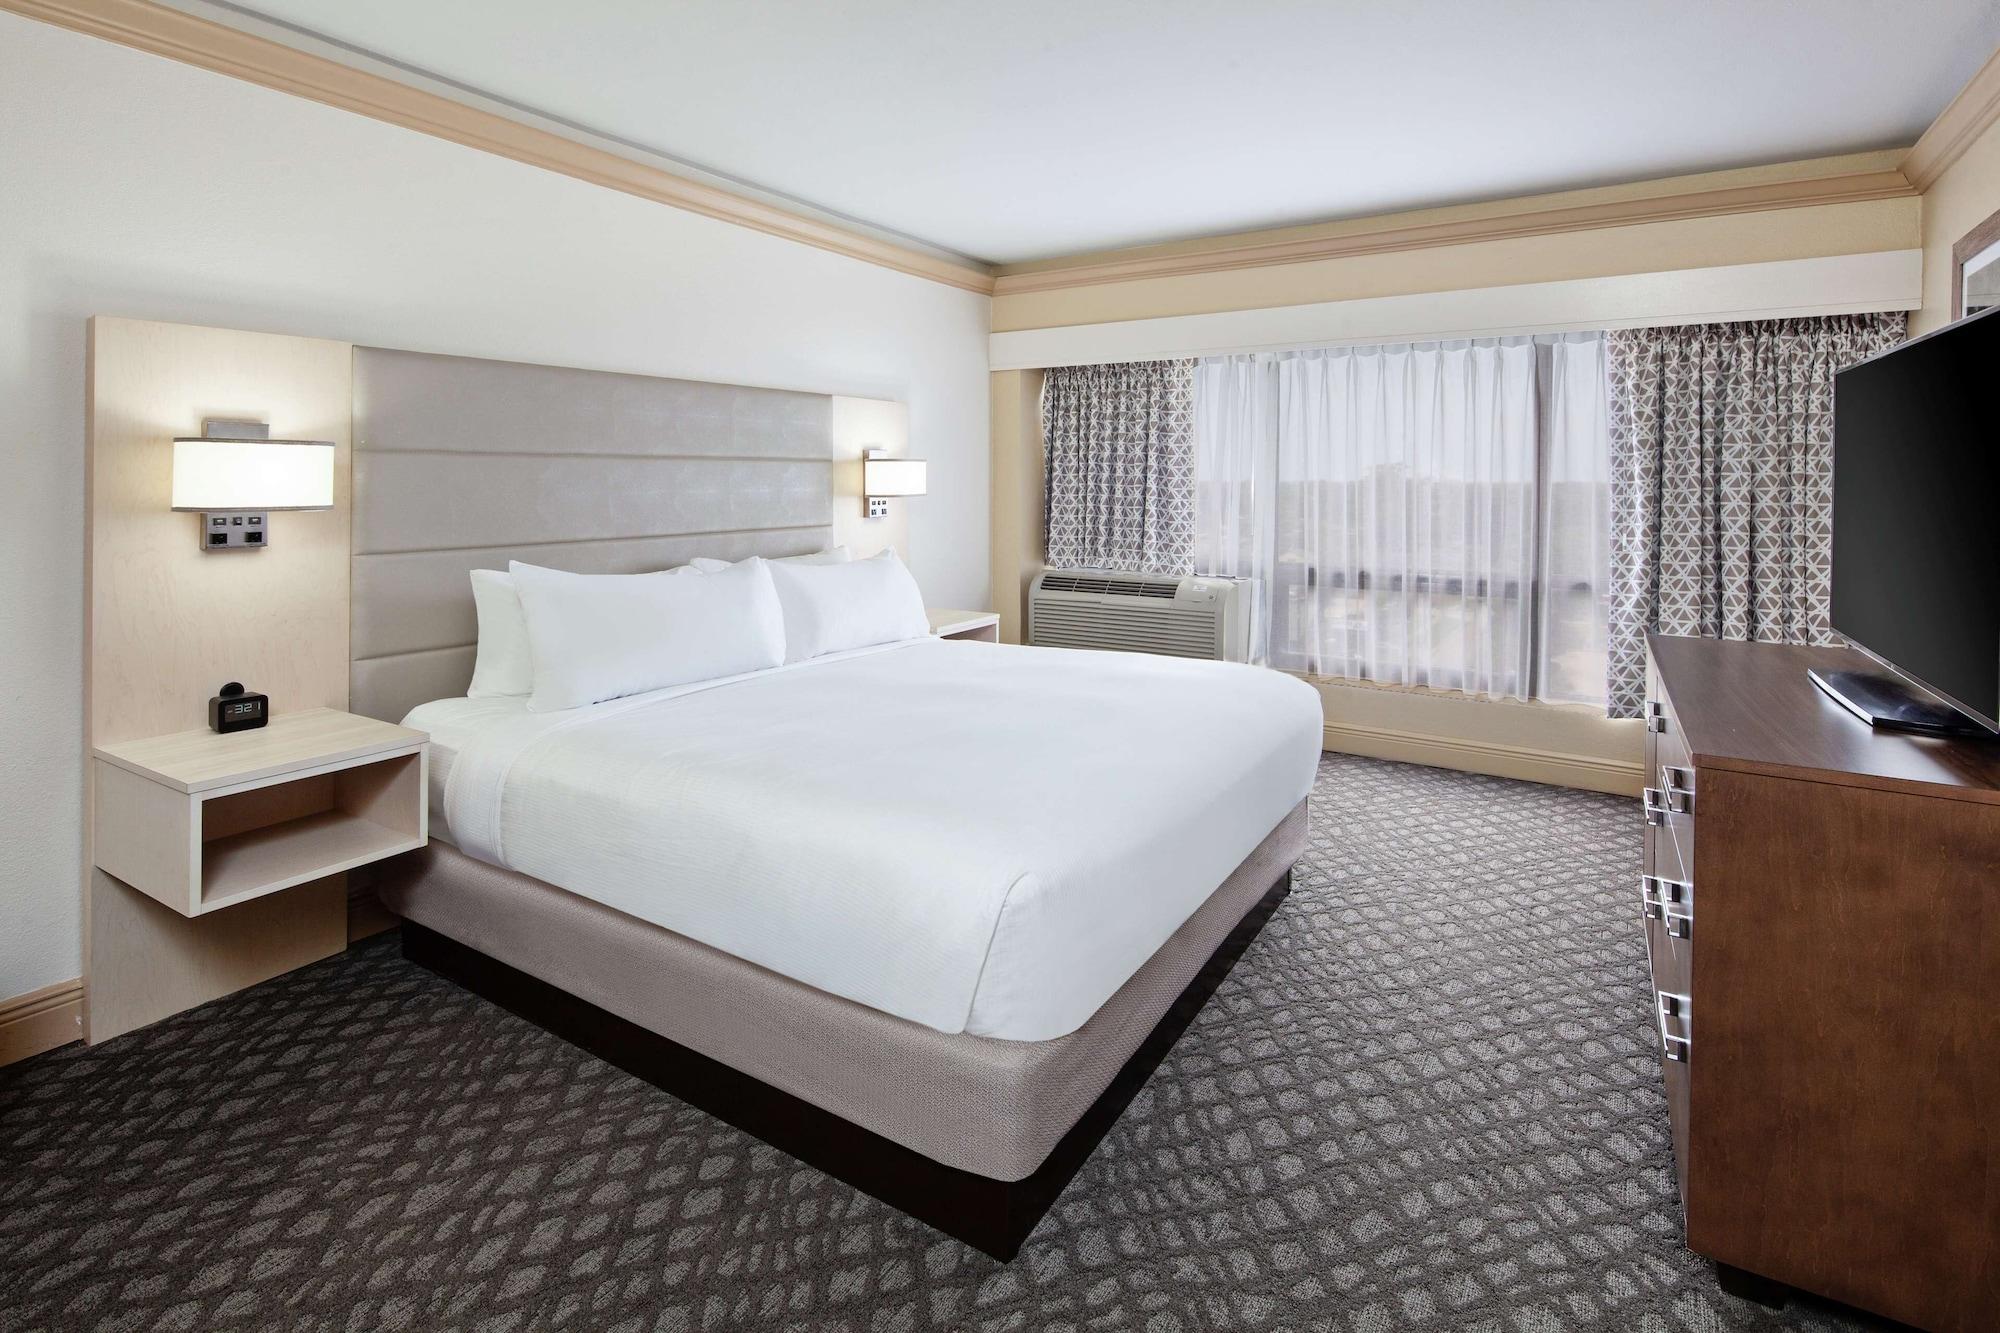 Doubletree By Hilton New Orleans Airport Hotel Kenner Luaran gambar